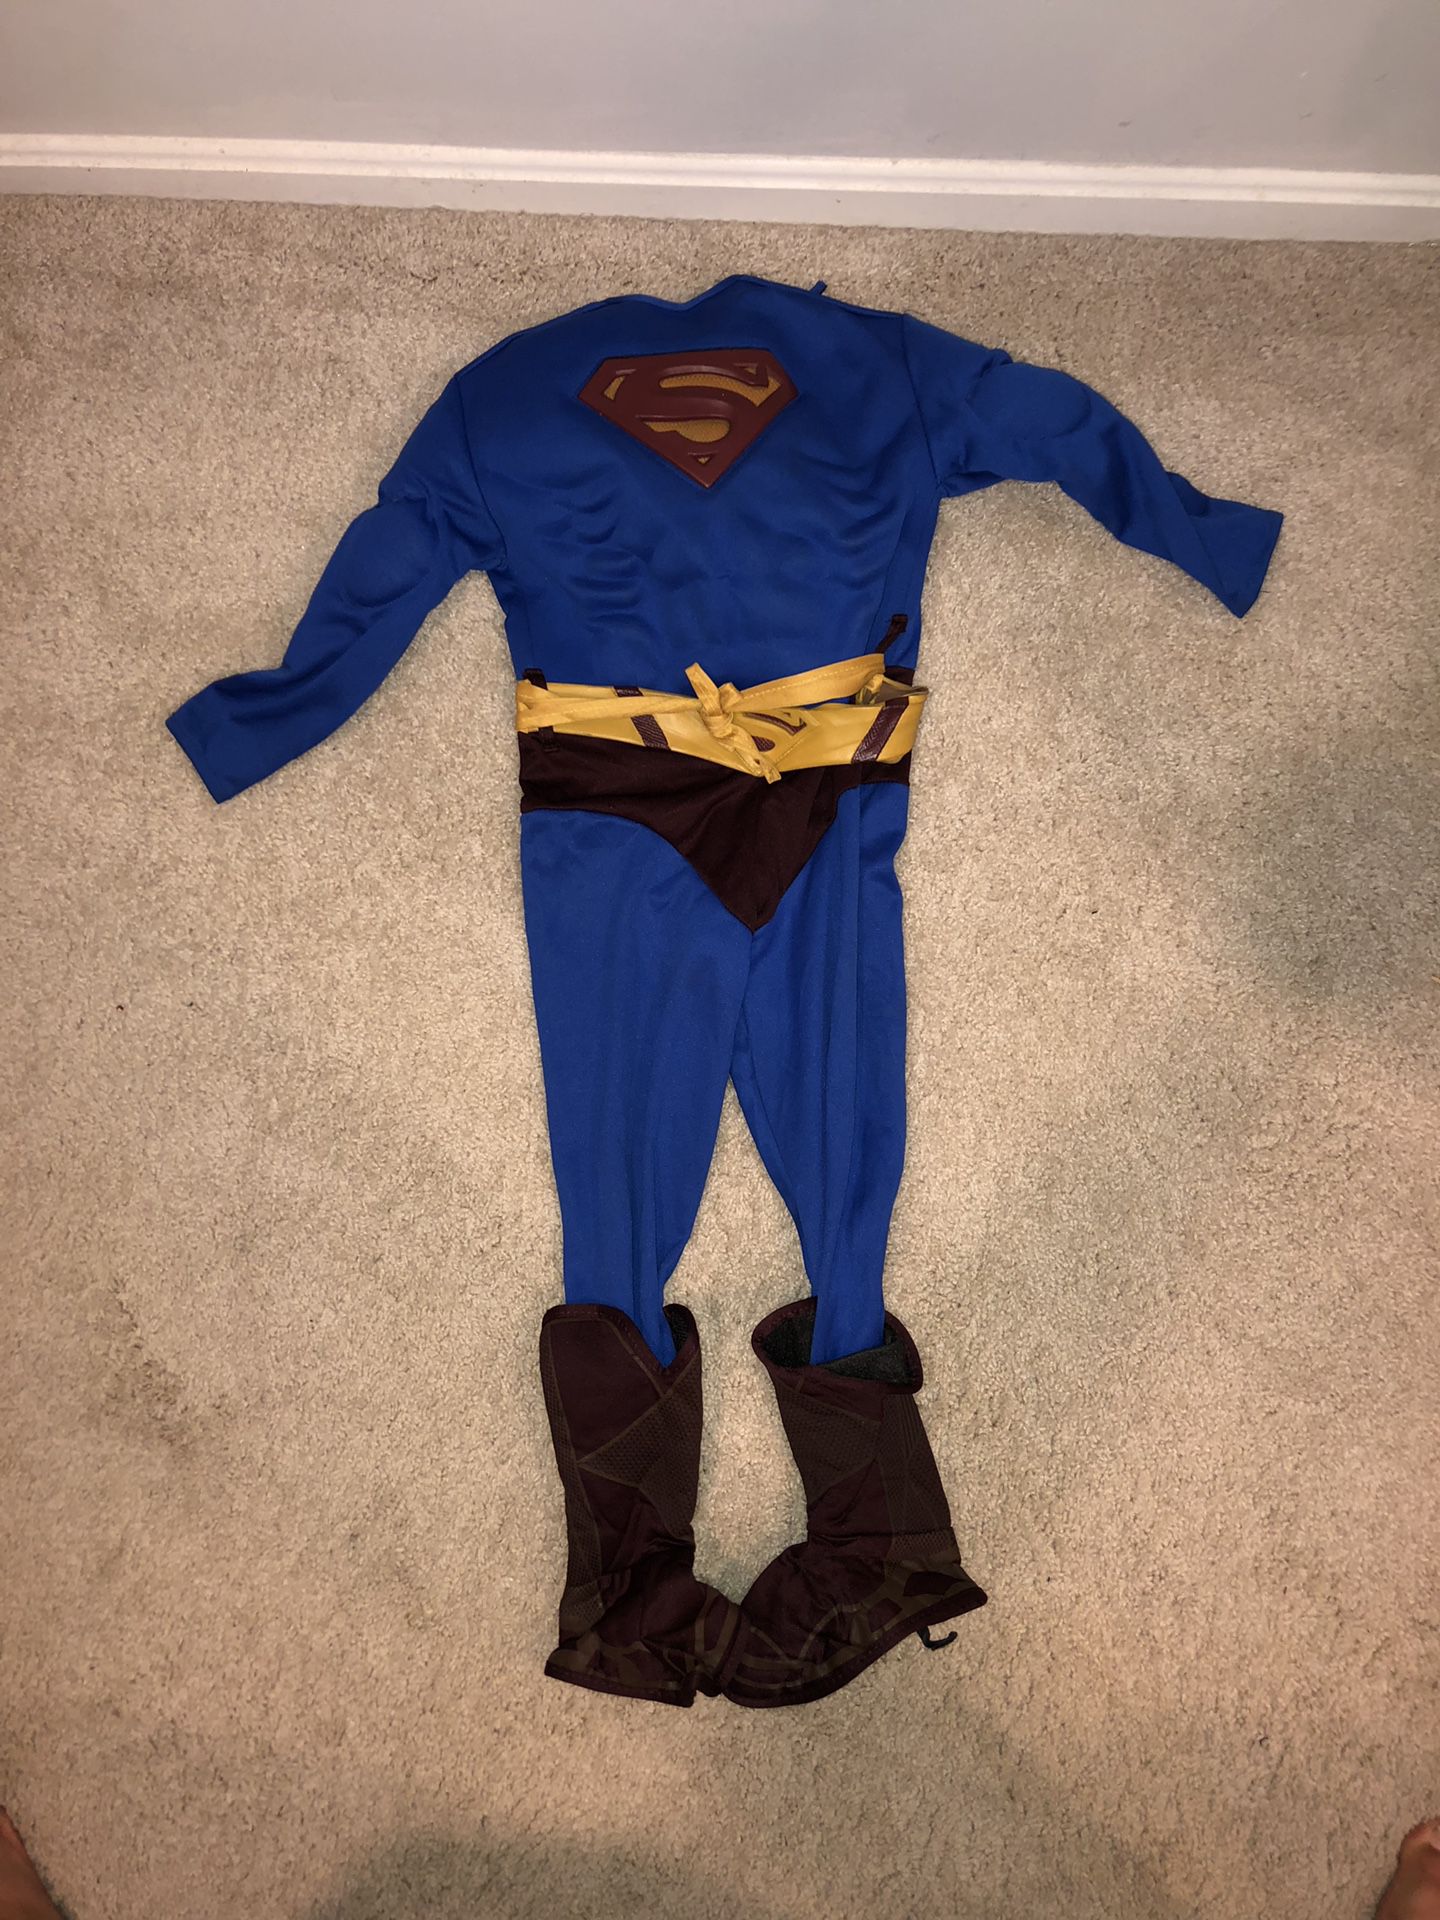 Kids Superman Costume with defined muscles